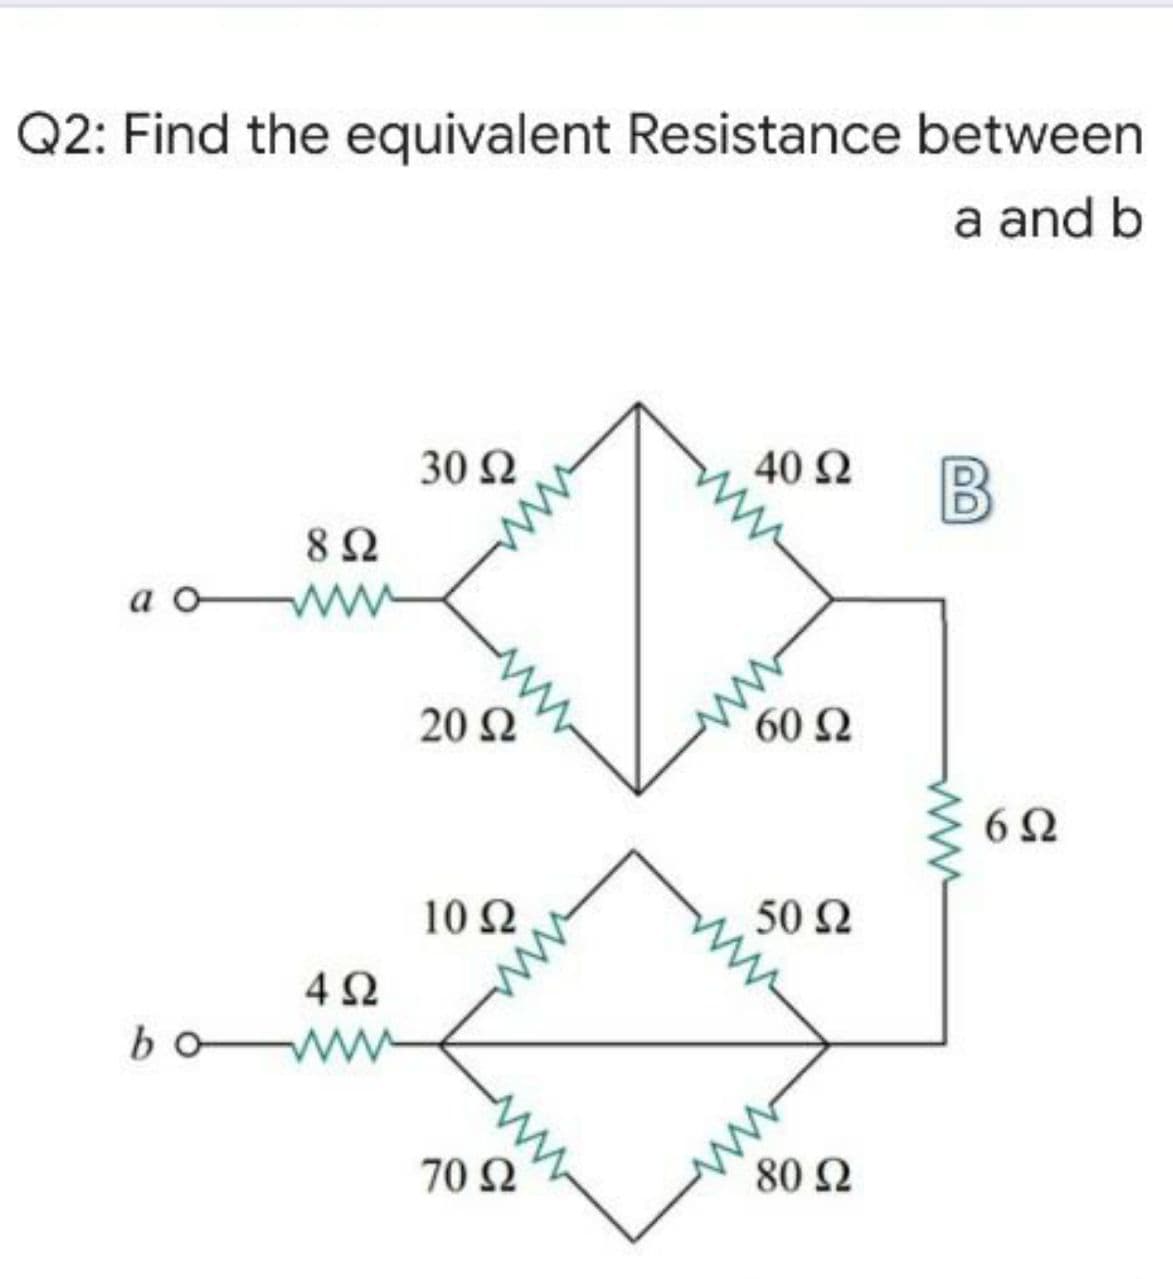 Q2: Find the equivalent Resistance between
a and b
30 2
40 2
B
8Ω
a o
20 Ω
60 Ω
6Ω
10Ω
50 2
bo W
70 Ω
80 2
ww
